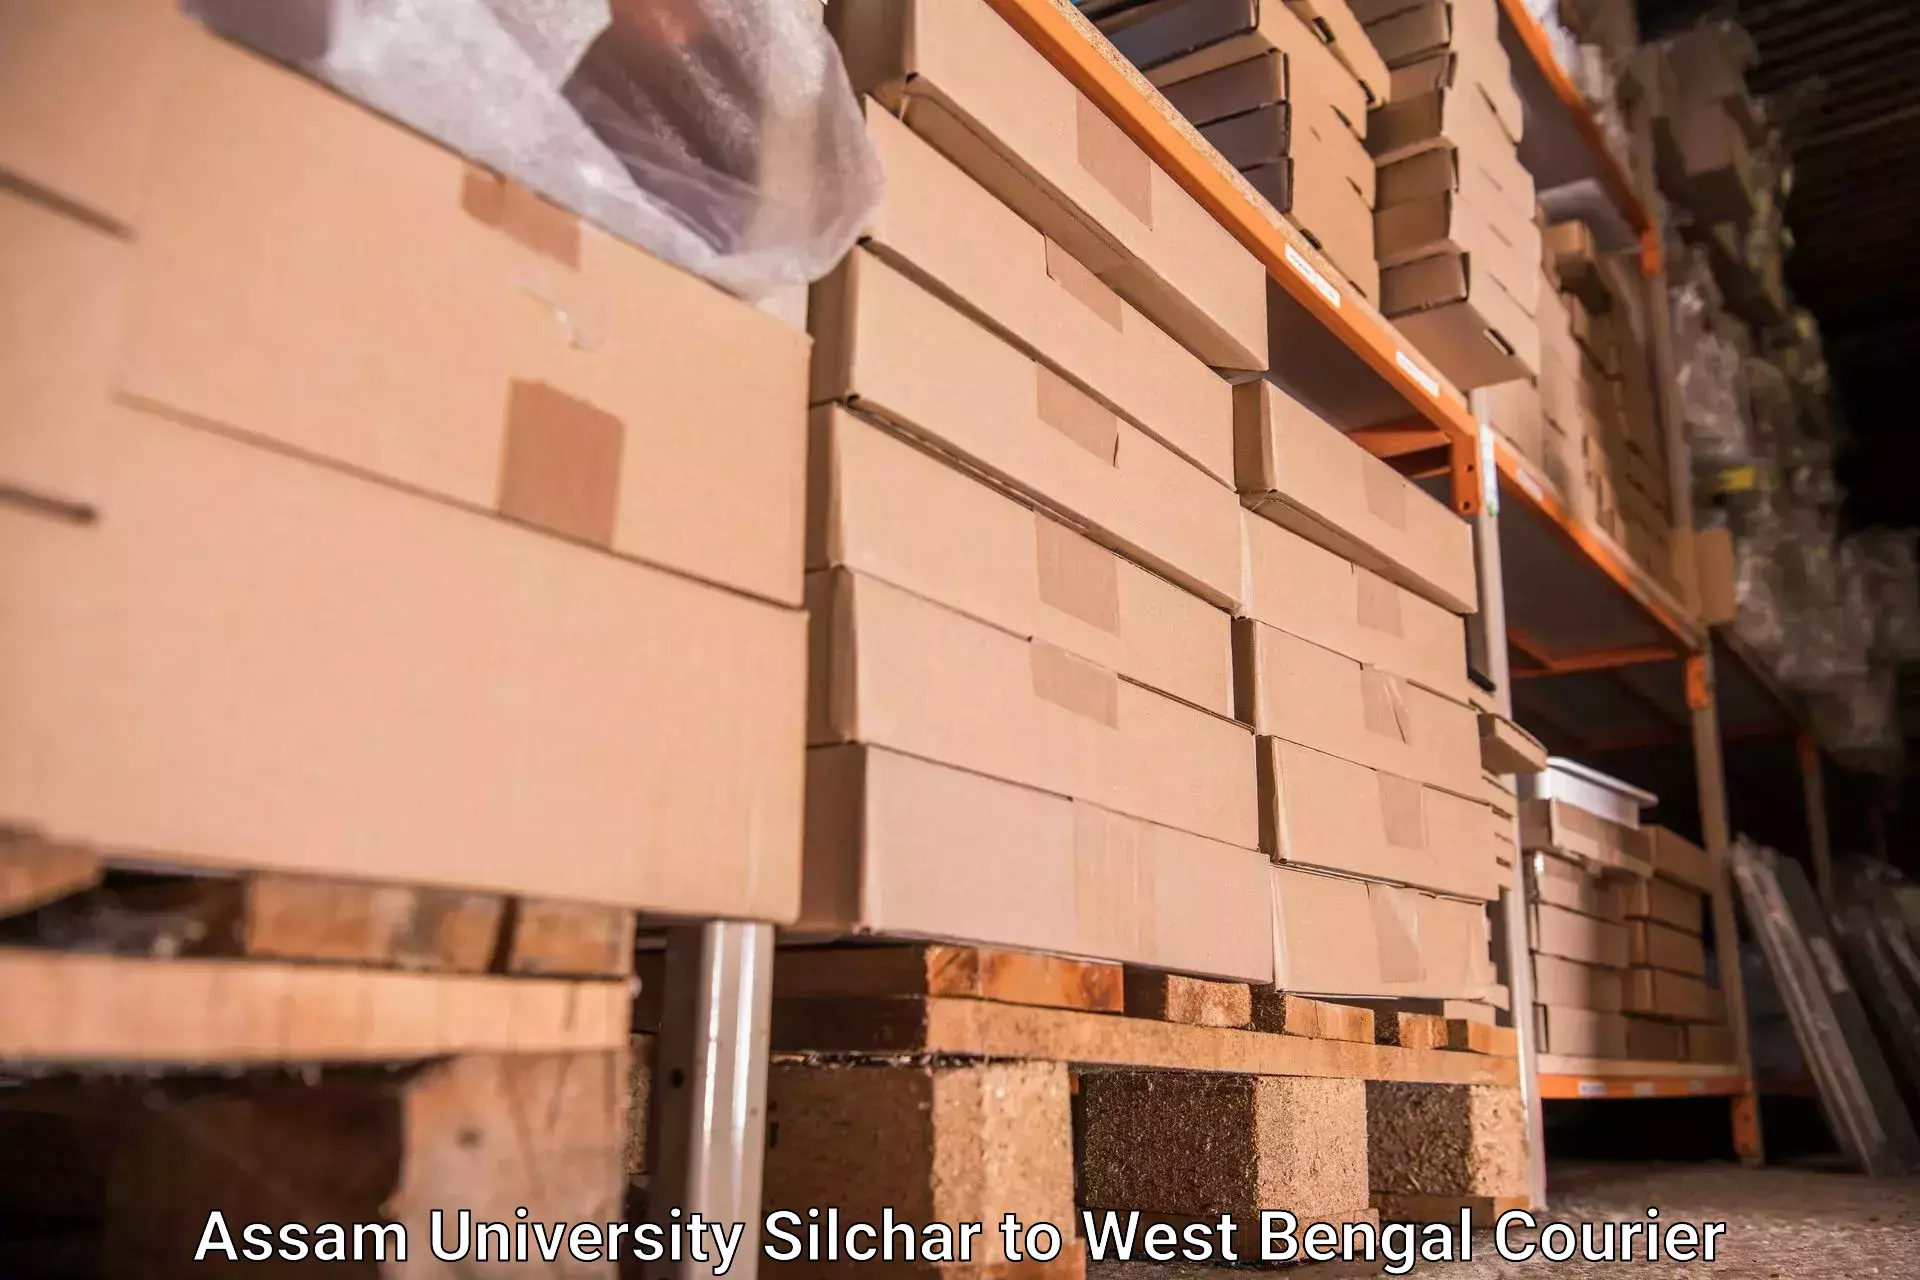 Baggage shipping experience Assam University Silchar to Barrackpore